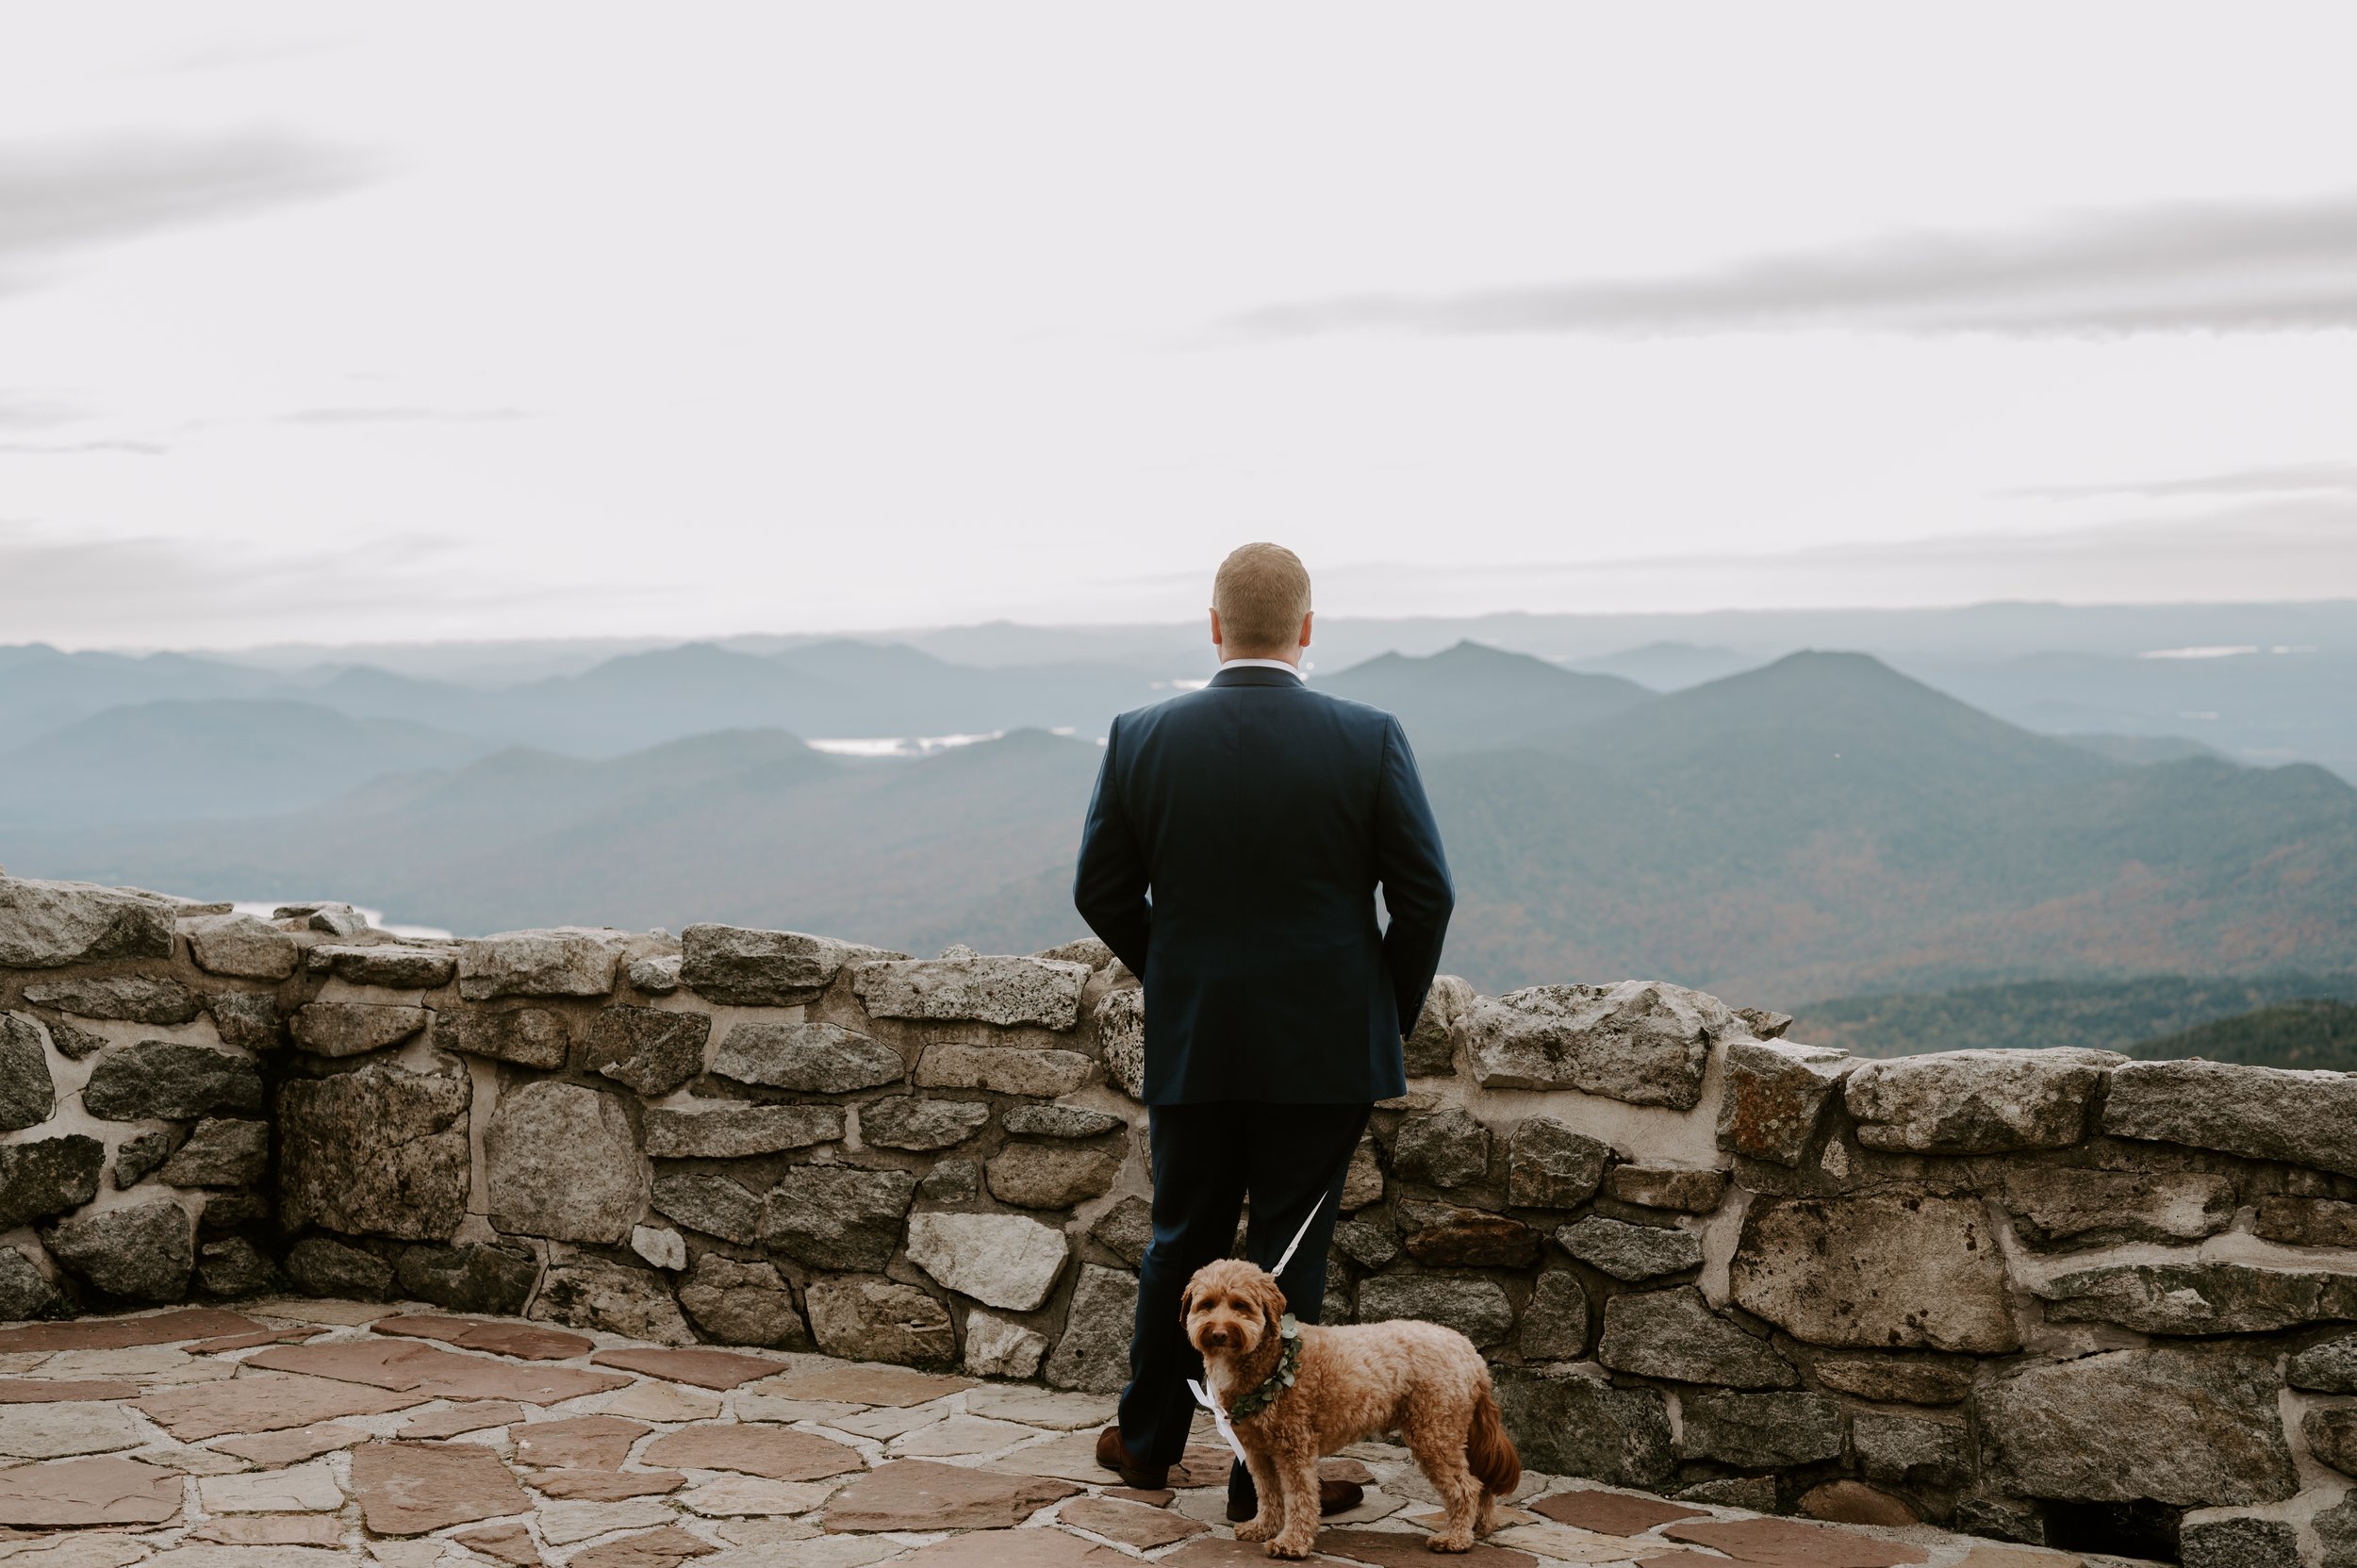 First look wedding photos at White Face Mountain Lake Placid New York